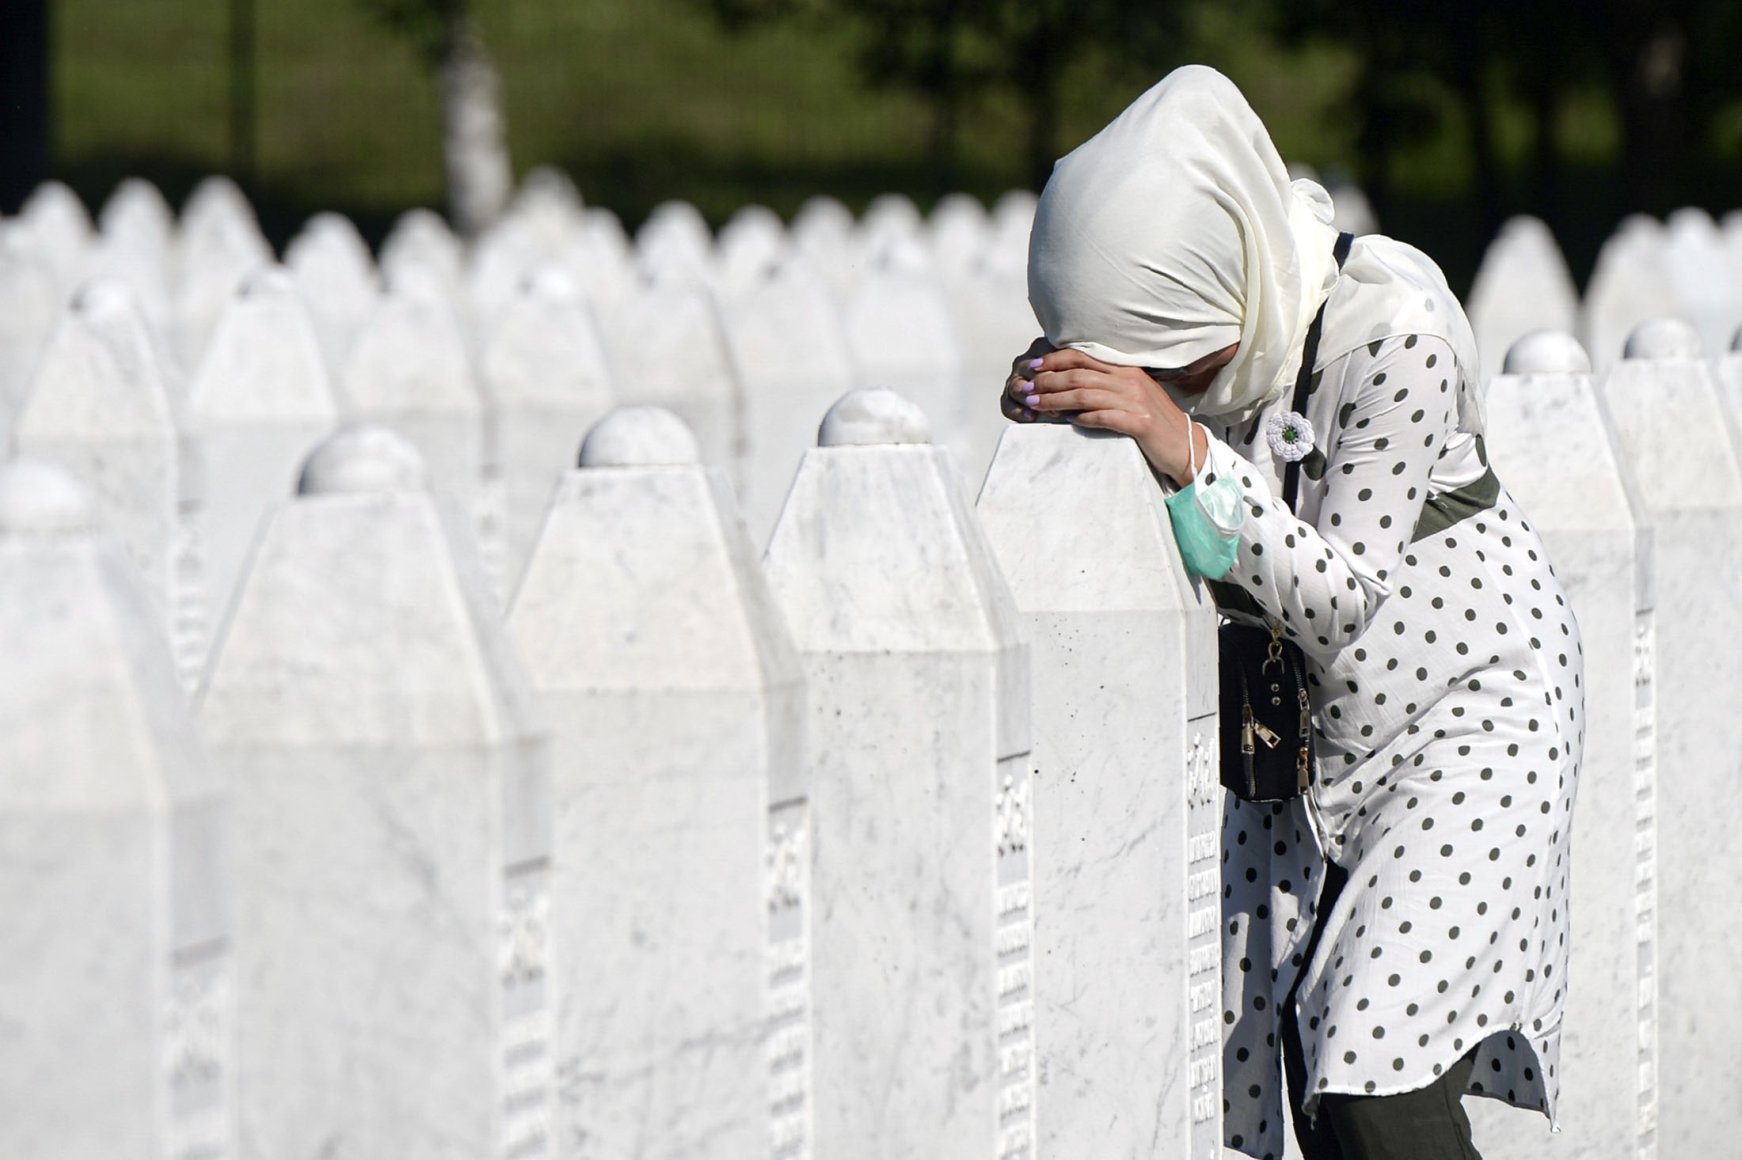 Over 7,000 Srebrenica Victims have now been recovered.